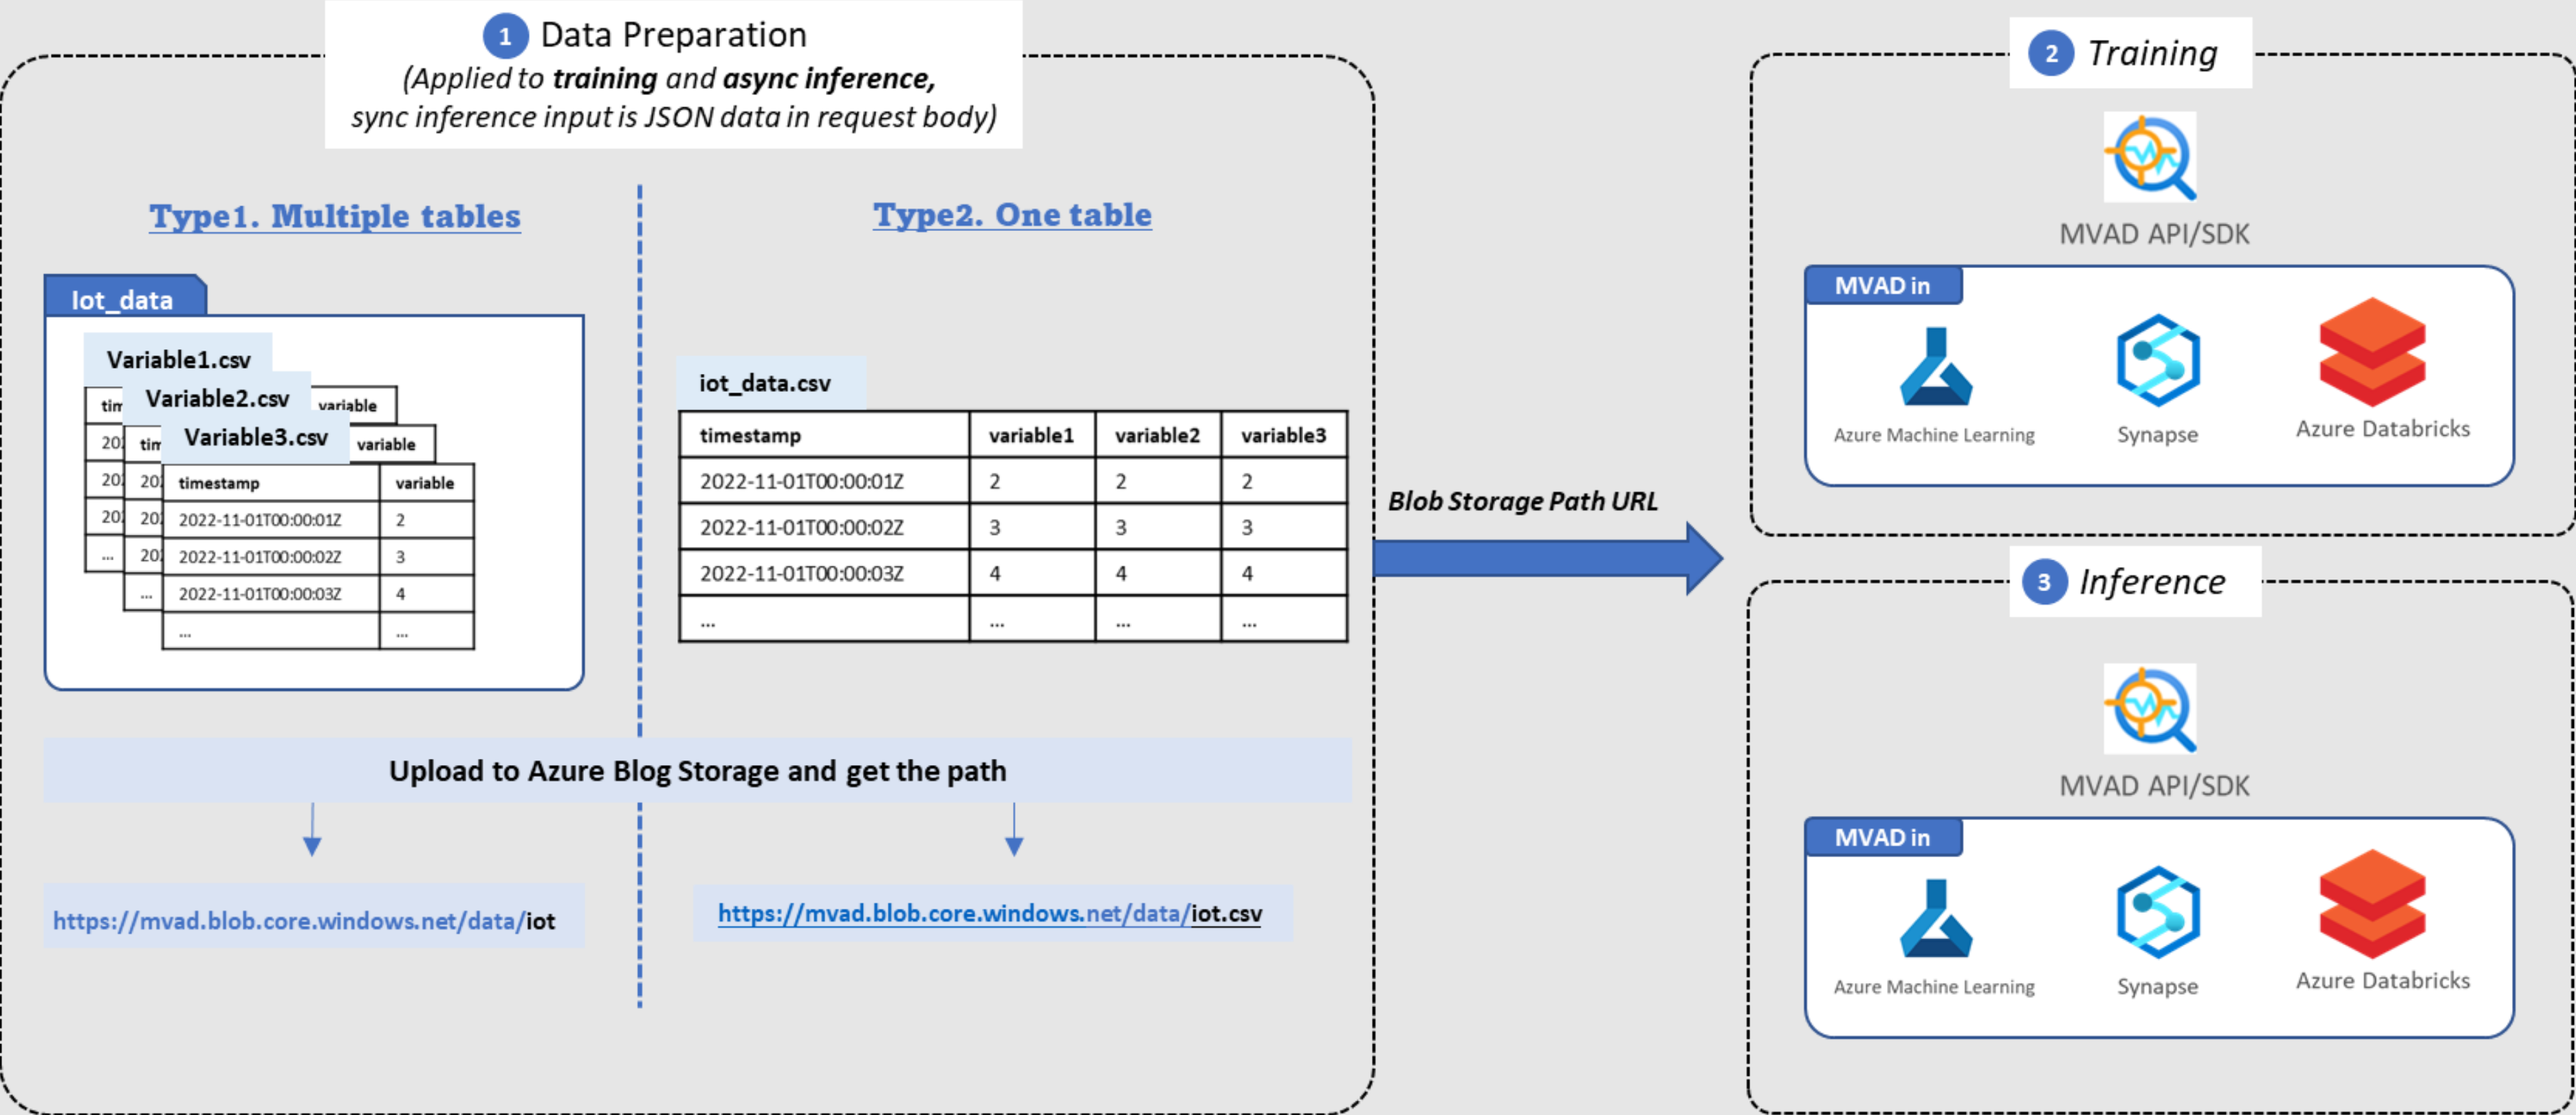 Diagram of two data schemas with three steps: data preparation, training, inference.